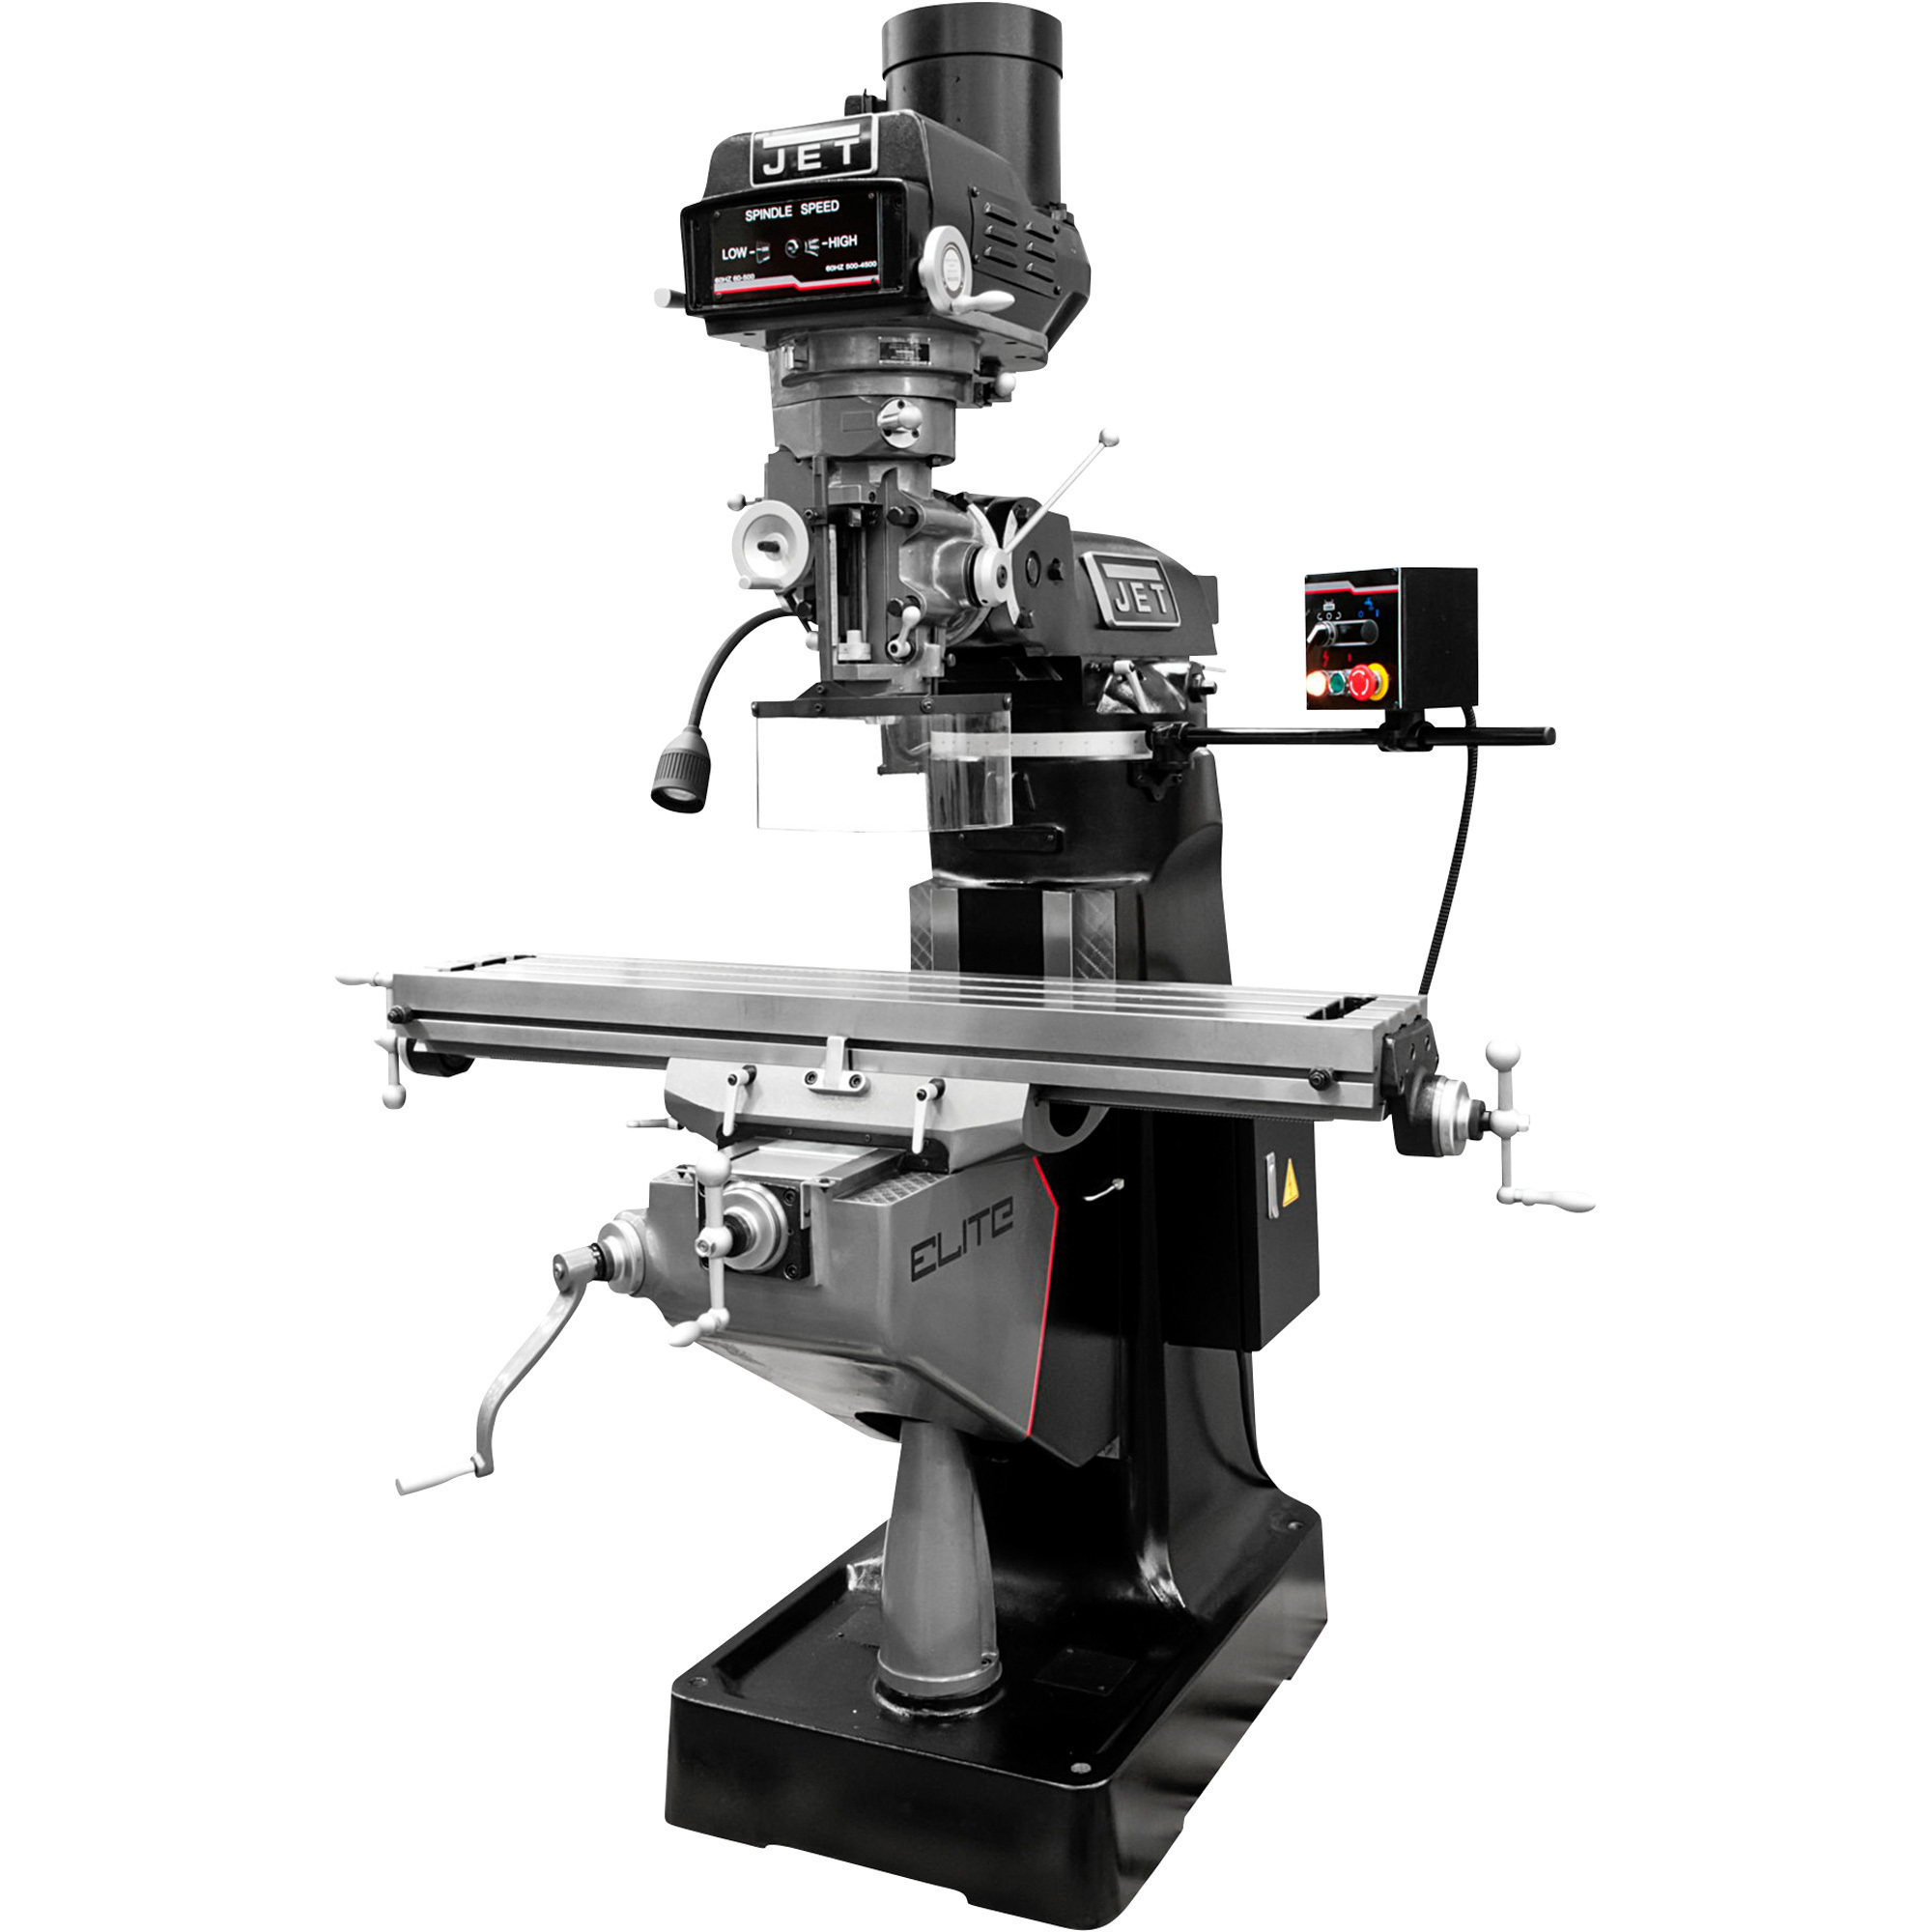 JET Elite Mill with X, Y, Z-Axis Powerfeeds and Power Air Draw Bar, 9Inch x 49Inch Table, 3 HP, Model ETM-949 -  894108